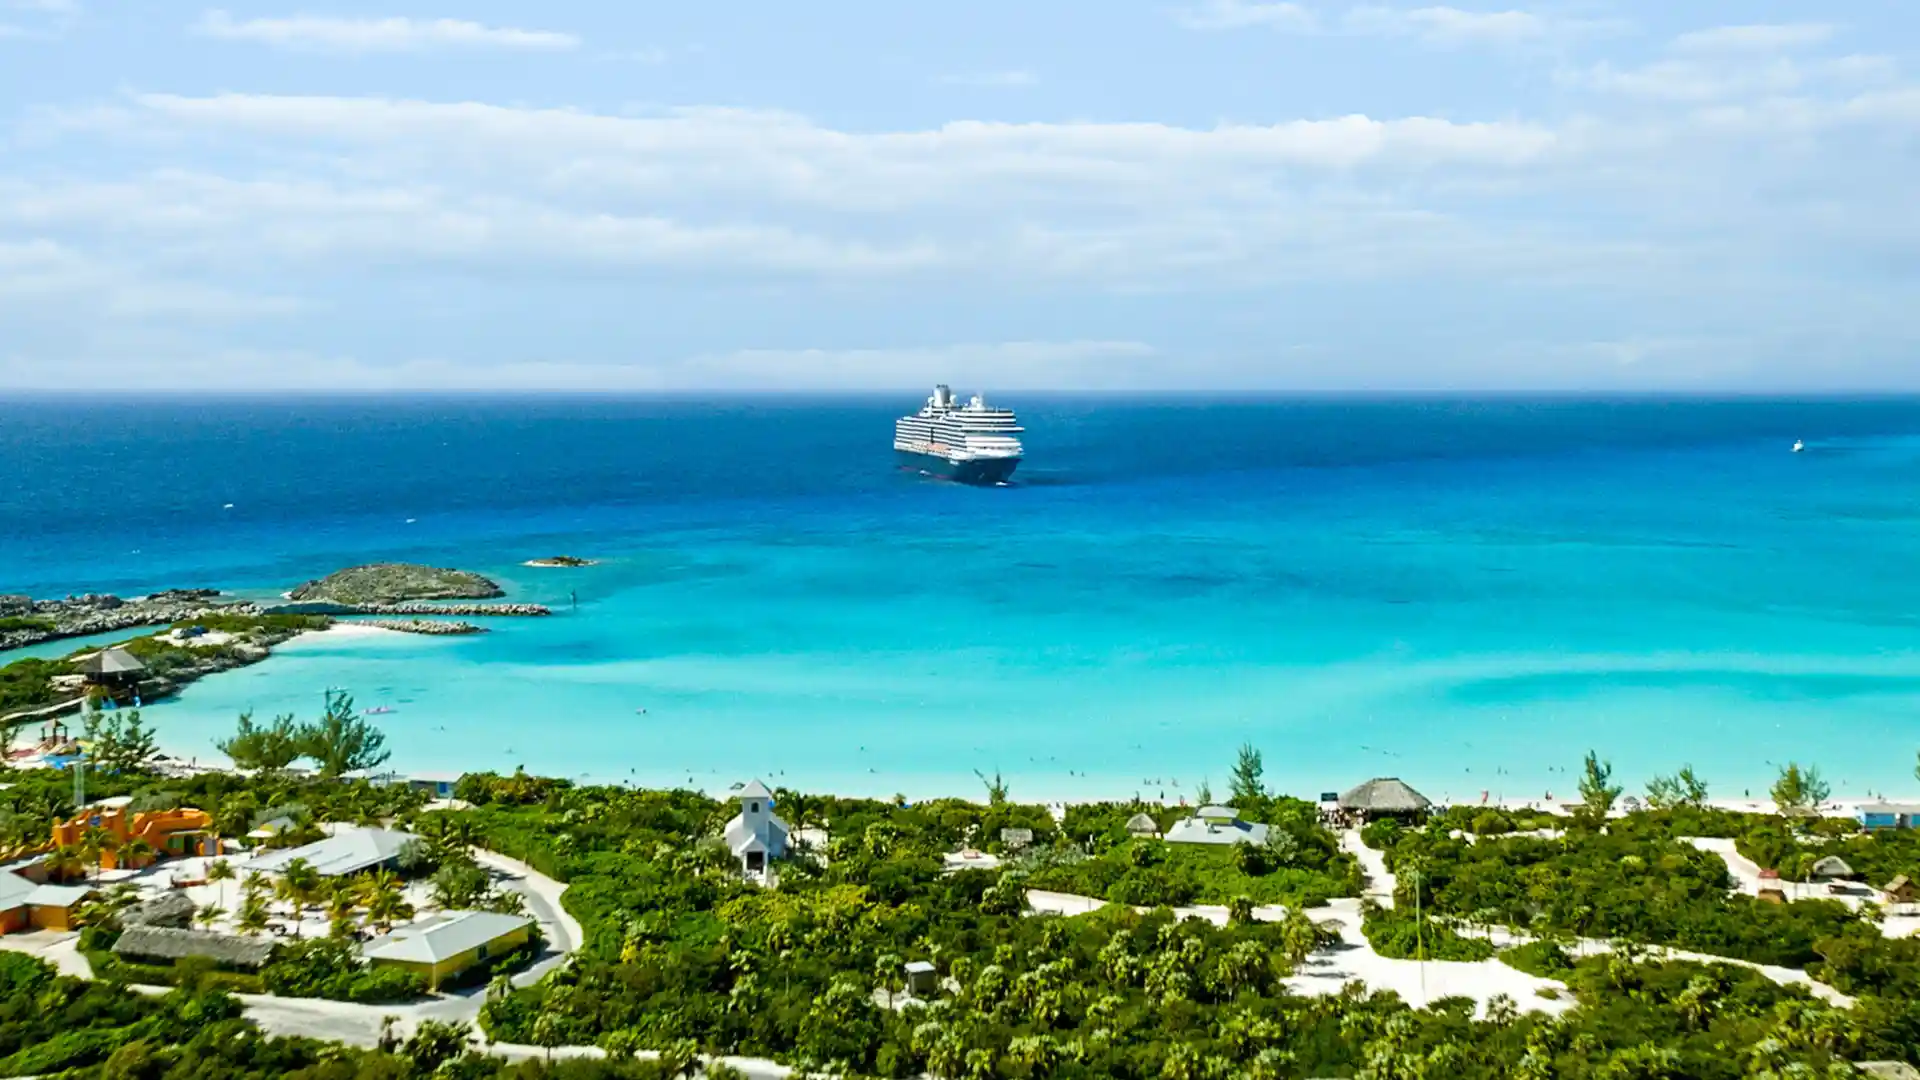 View of Half Moon Cay, a private island in the Bahamas, with Holland America Line cruise ship in the distance.